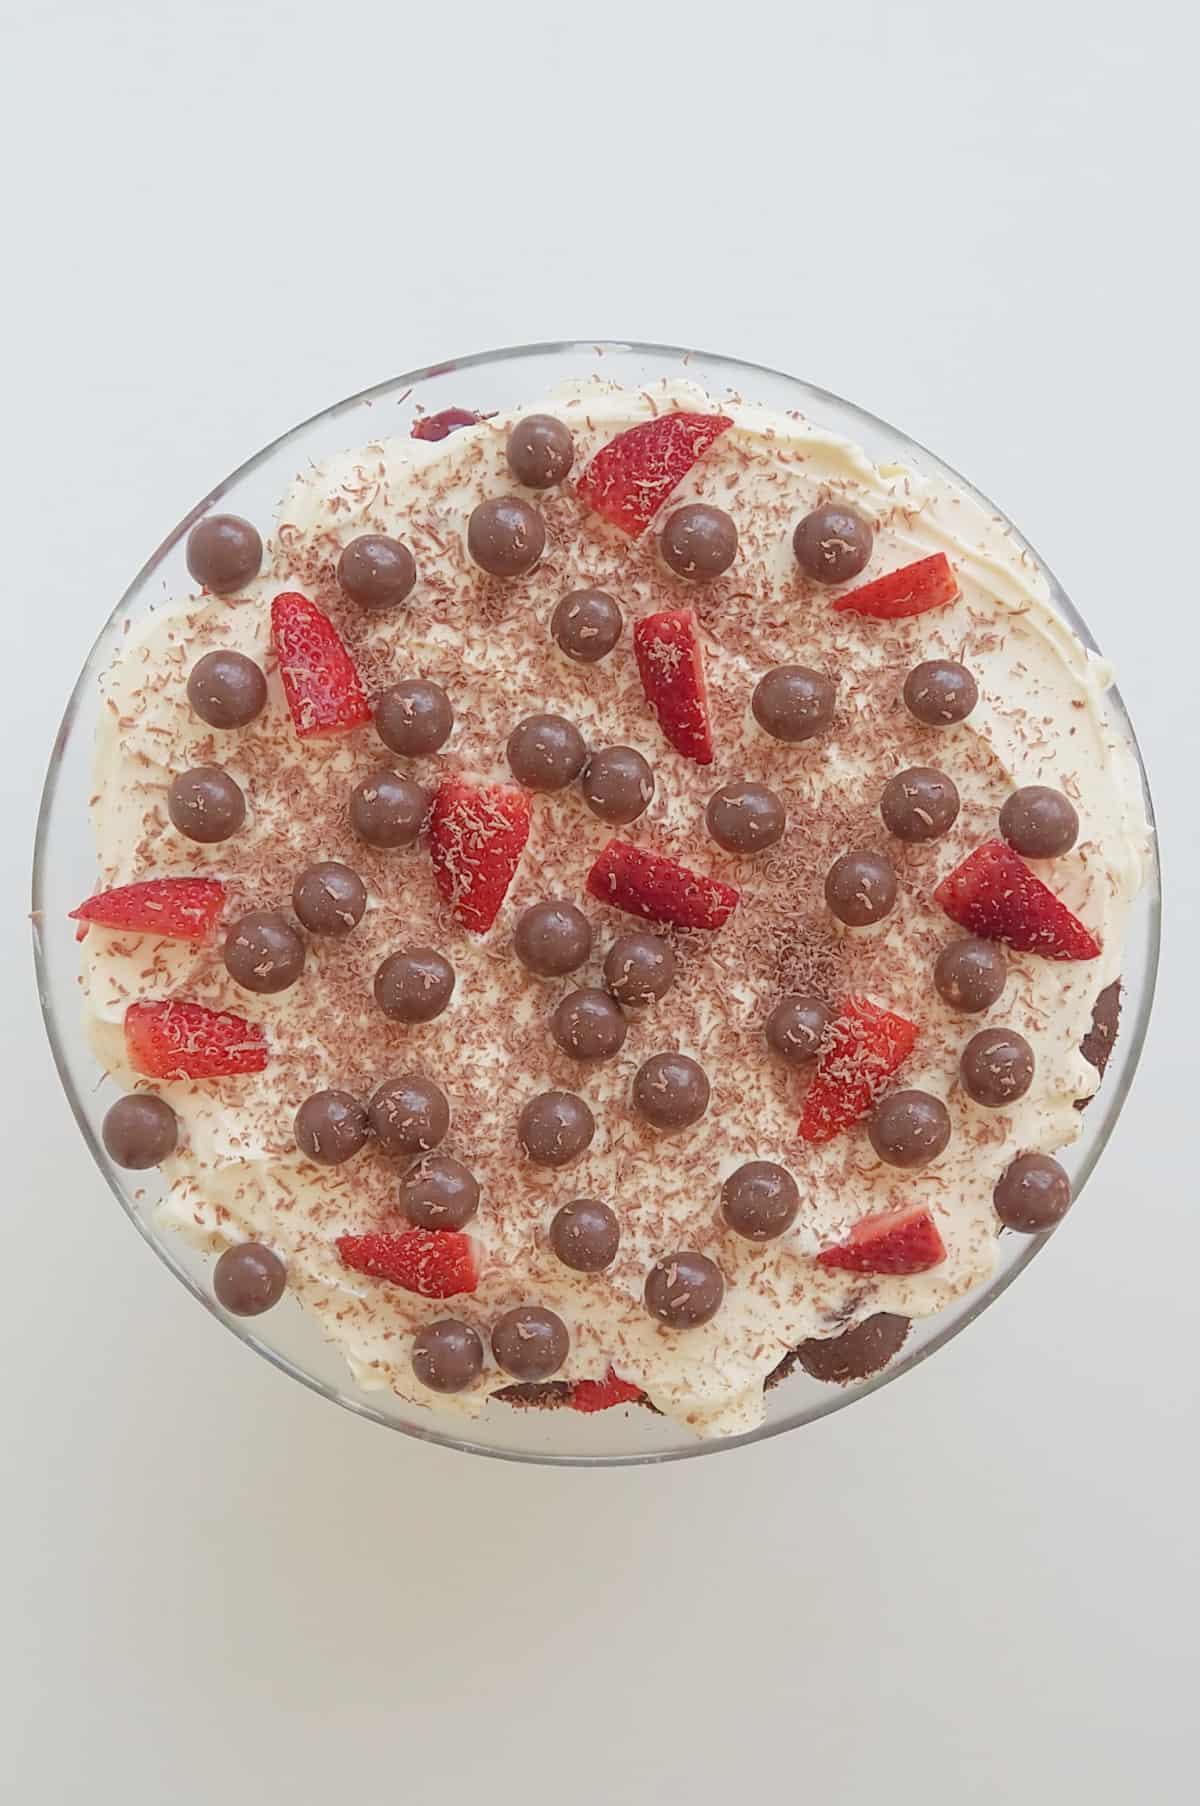 Overhead view of chocolate trifle in a glass bowl topped with strawberries, Maltesers and chocolate.